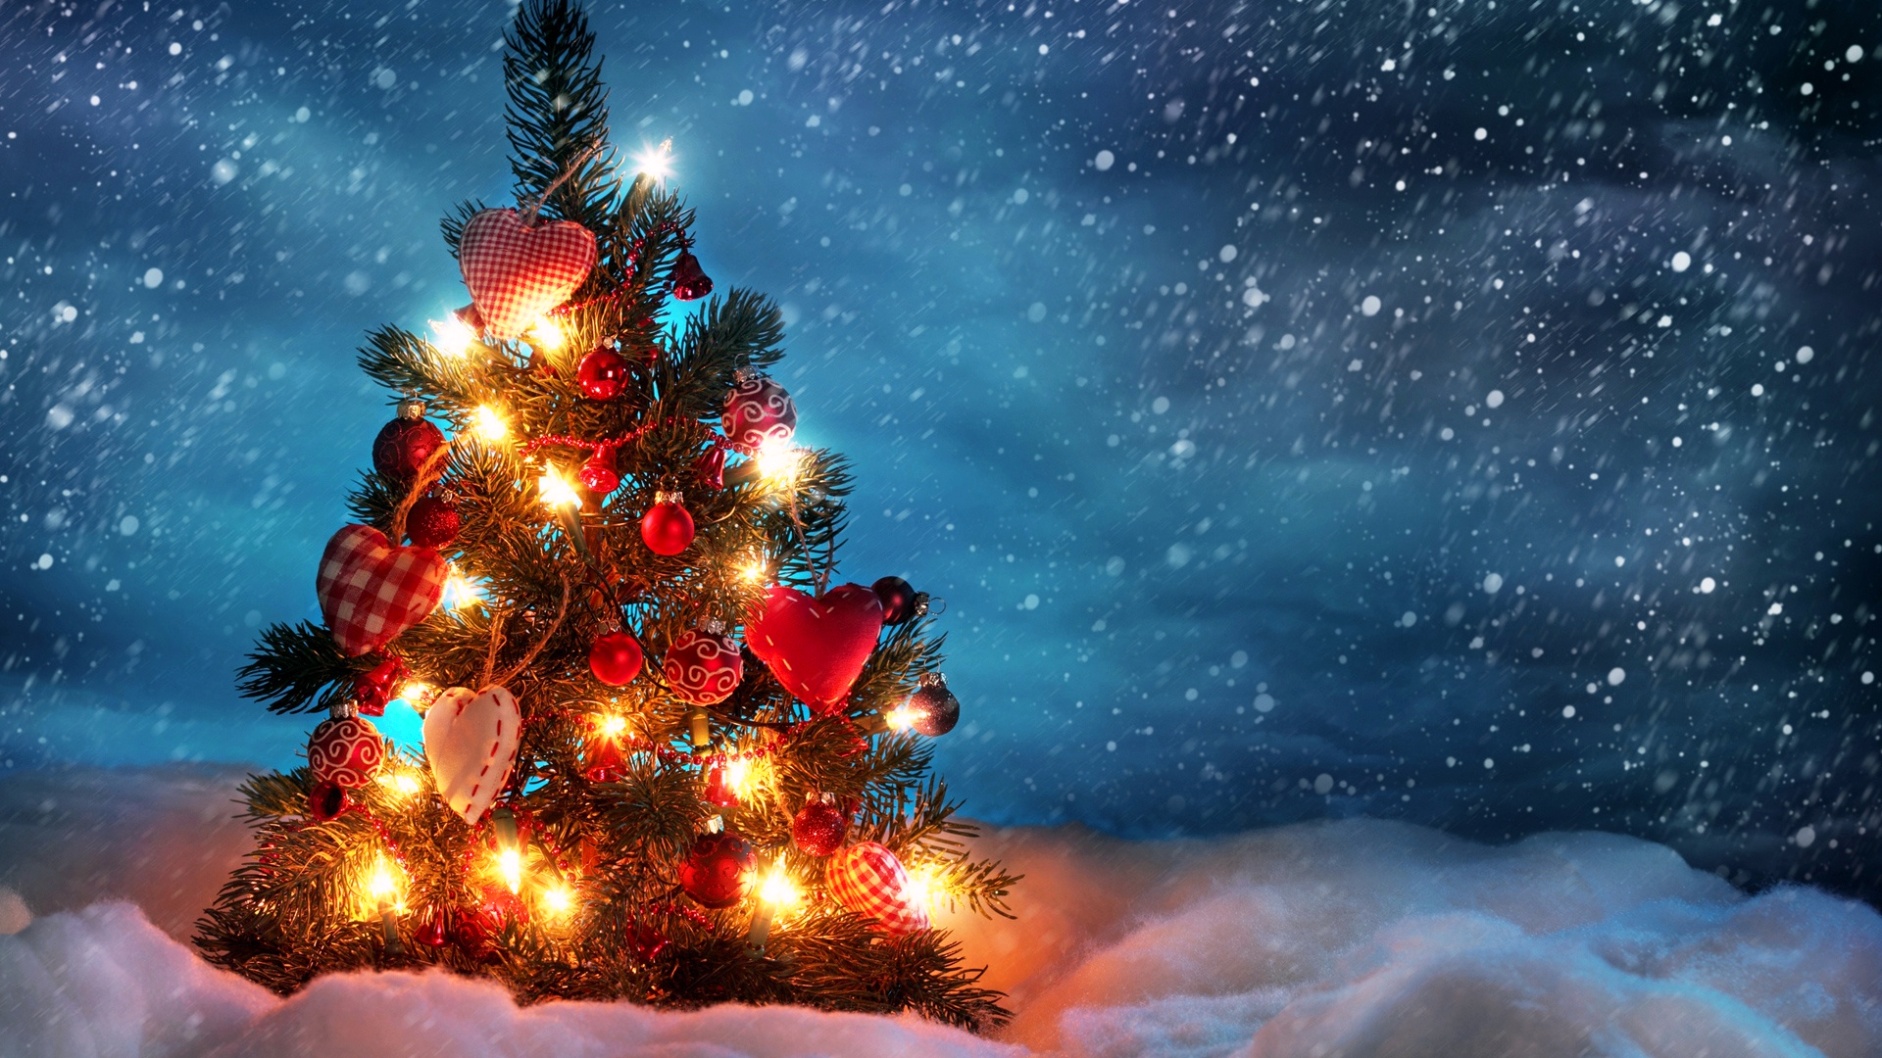 Top 5 Latest HD Christmas Wallpapers For Desktop | New HD ...